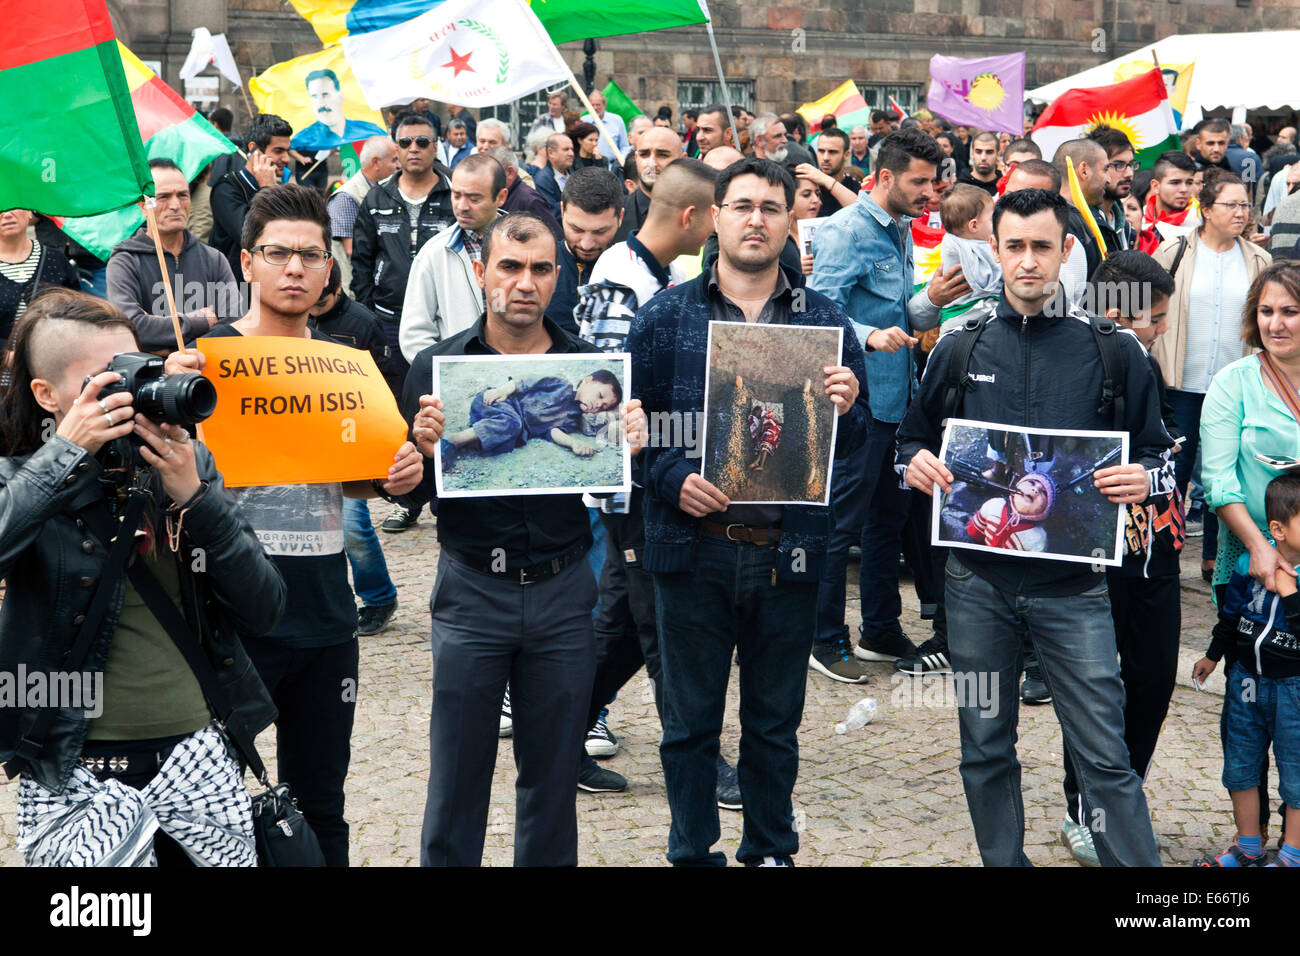 Copenhagen, Denmark – August 16th, 2014: Kurds demonstrates in front of the Danish parliament in Copenhagen against ISIS (Islamic State) warfare and atrocities in Iraq.  On the photo protestors displays photo of murdered children, a war crime allegedly carried out by ISIS in Iraq. Credit:  OJPHOTOS/Alamy Live News Stock Photo